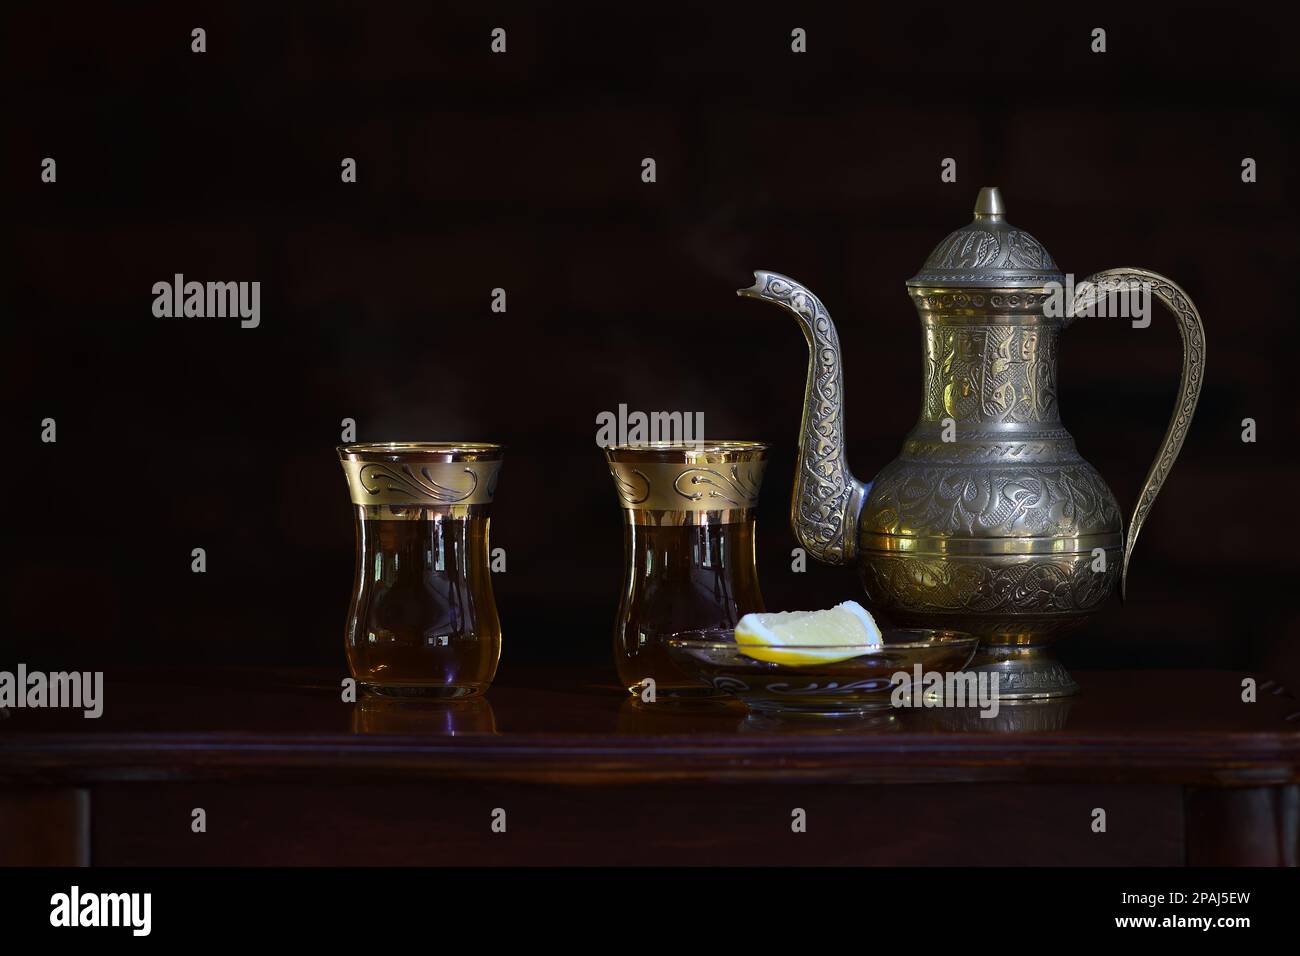 A classic, celebratory, ornate Turkish teapot and glasses shining in soft dark mood lighting with copy space to the left Stock Photo